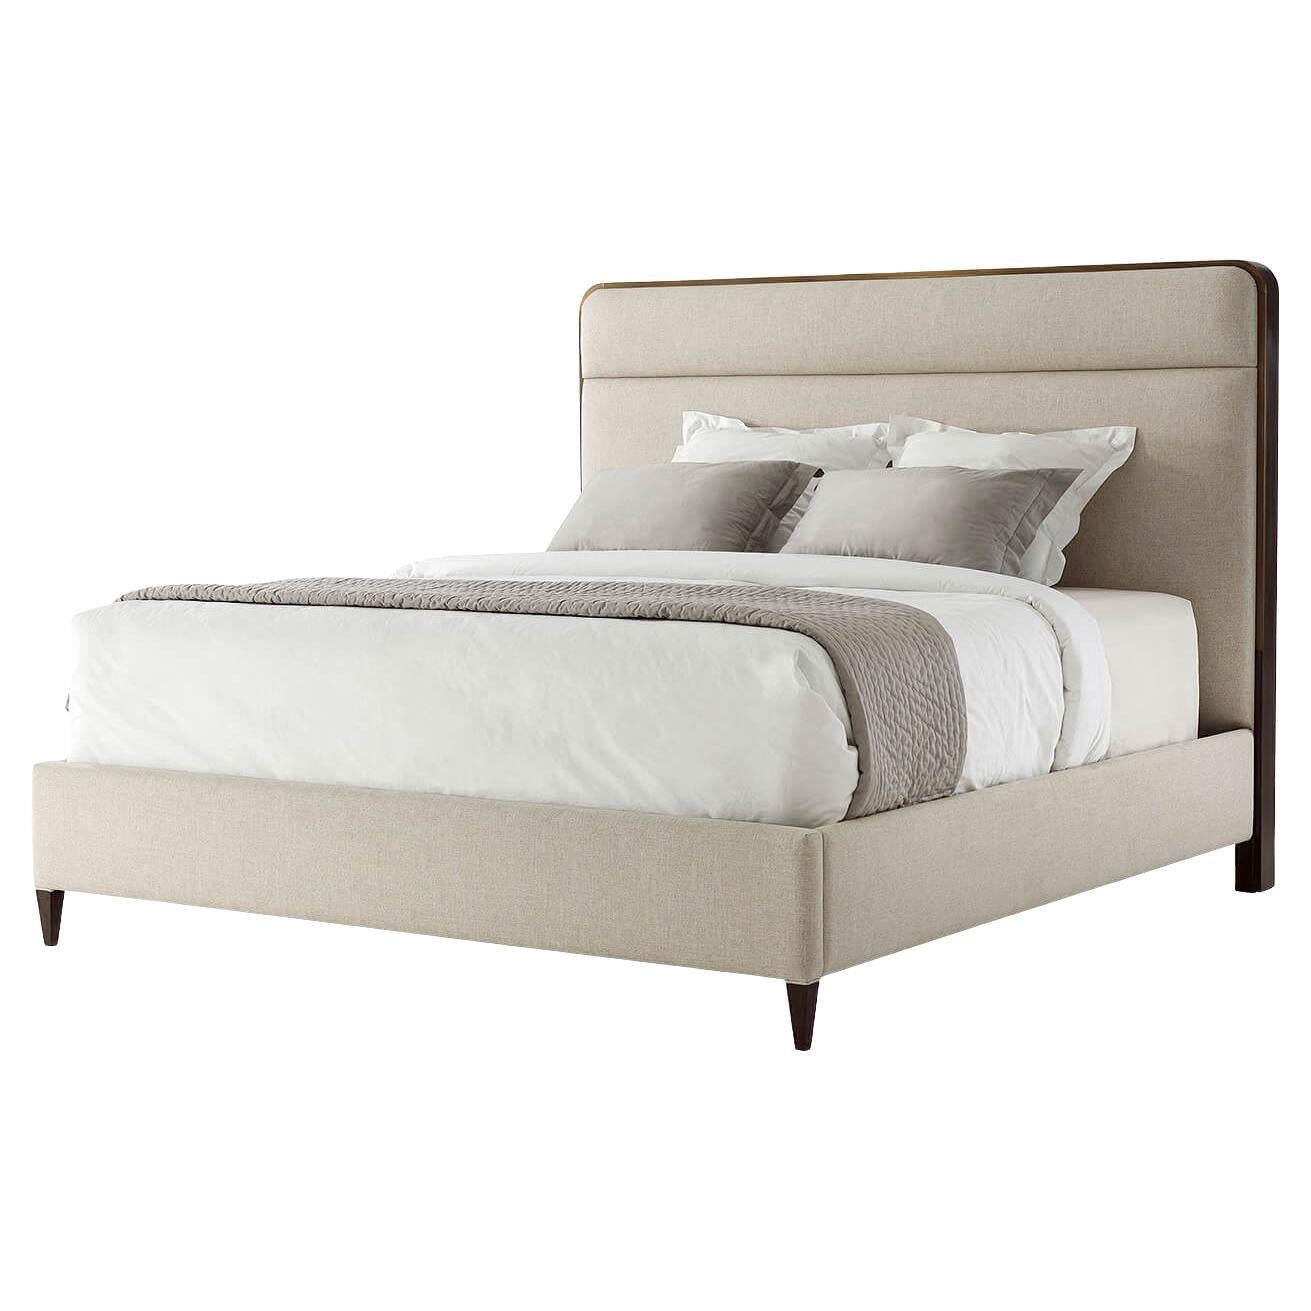 Modern Classic King Size Bed For Sale